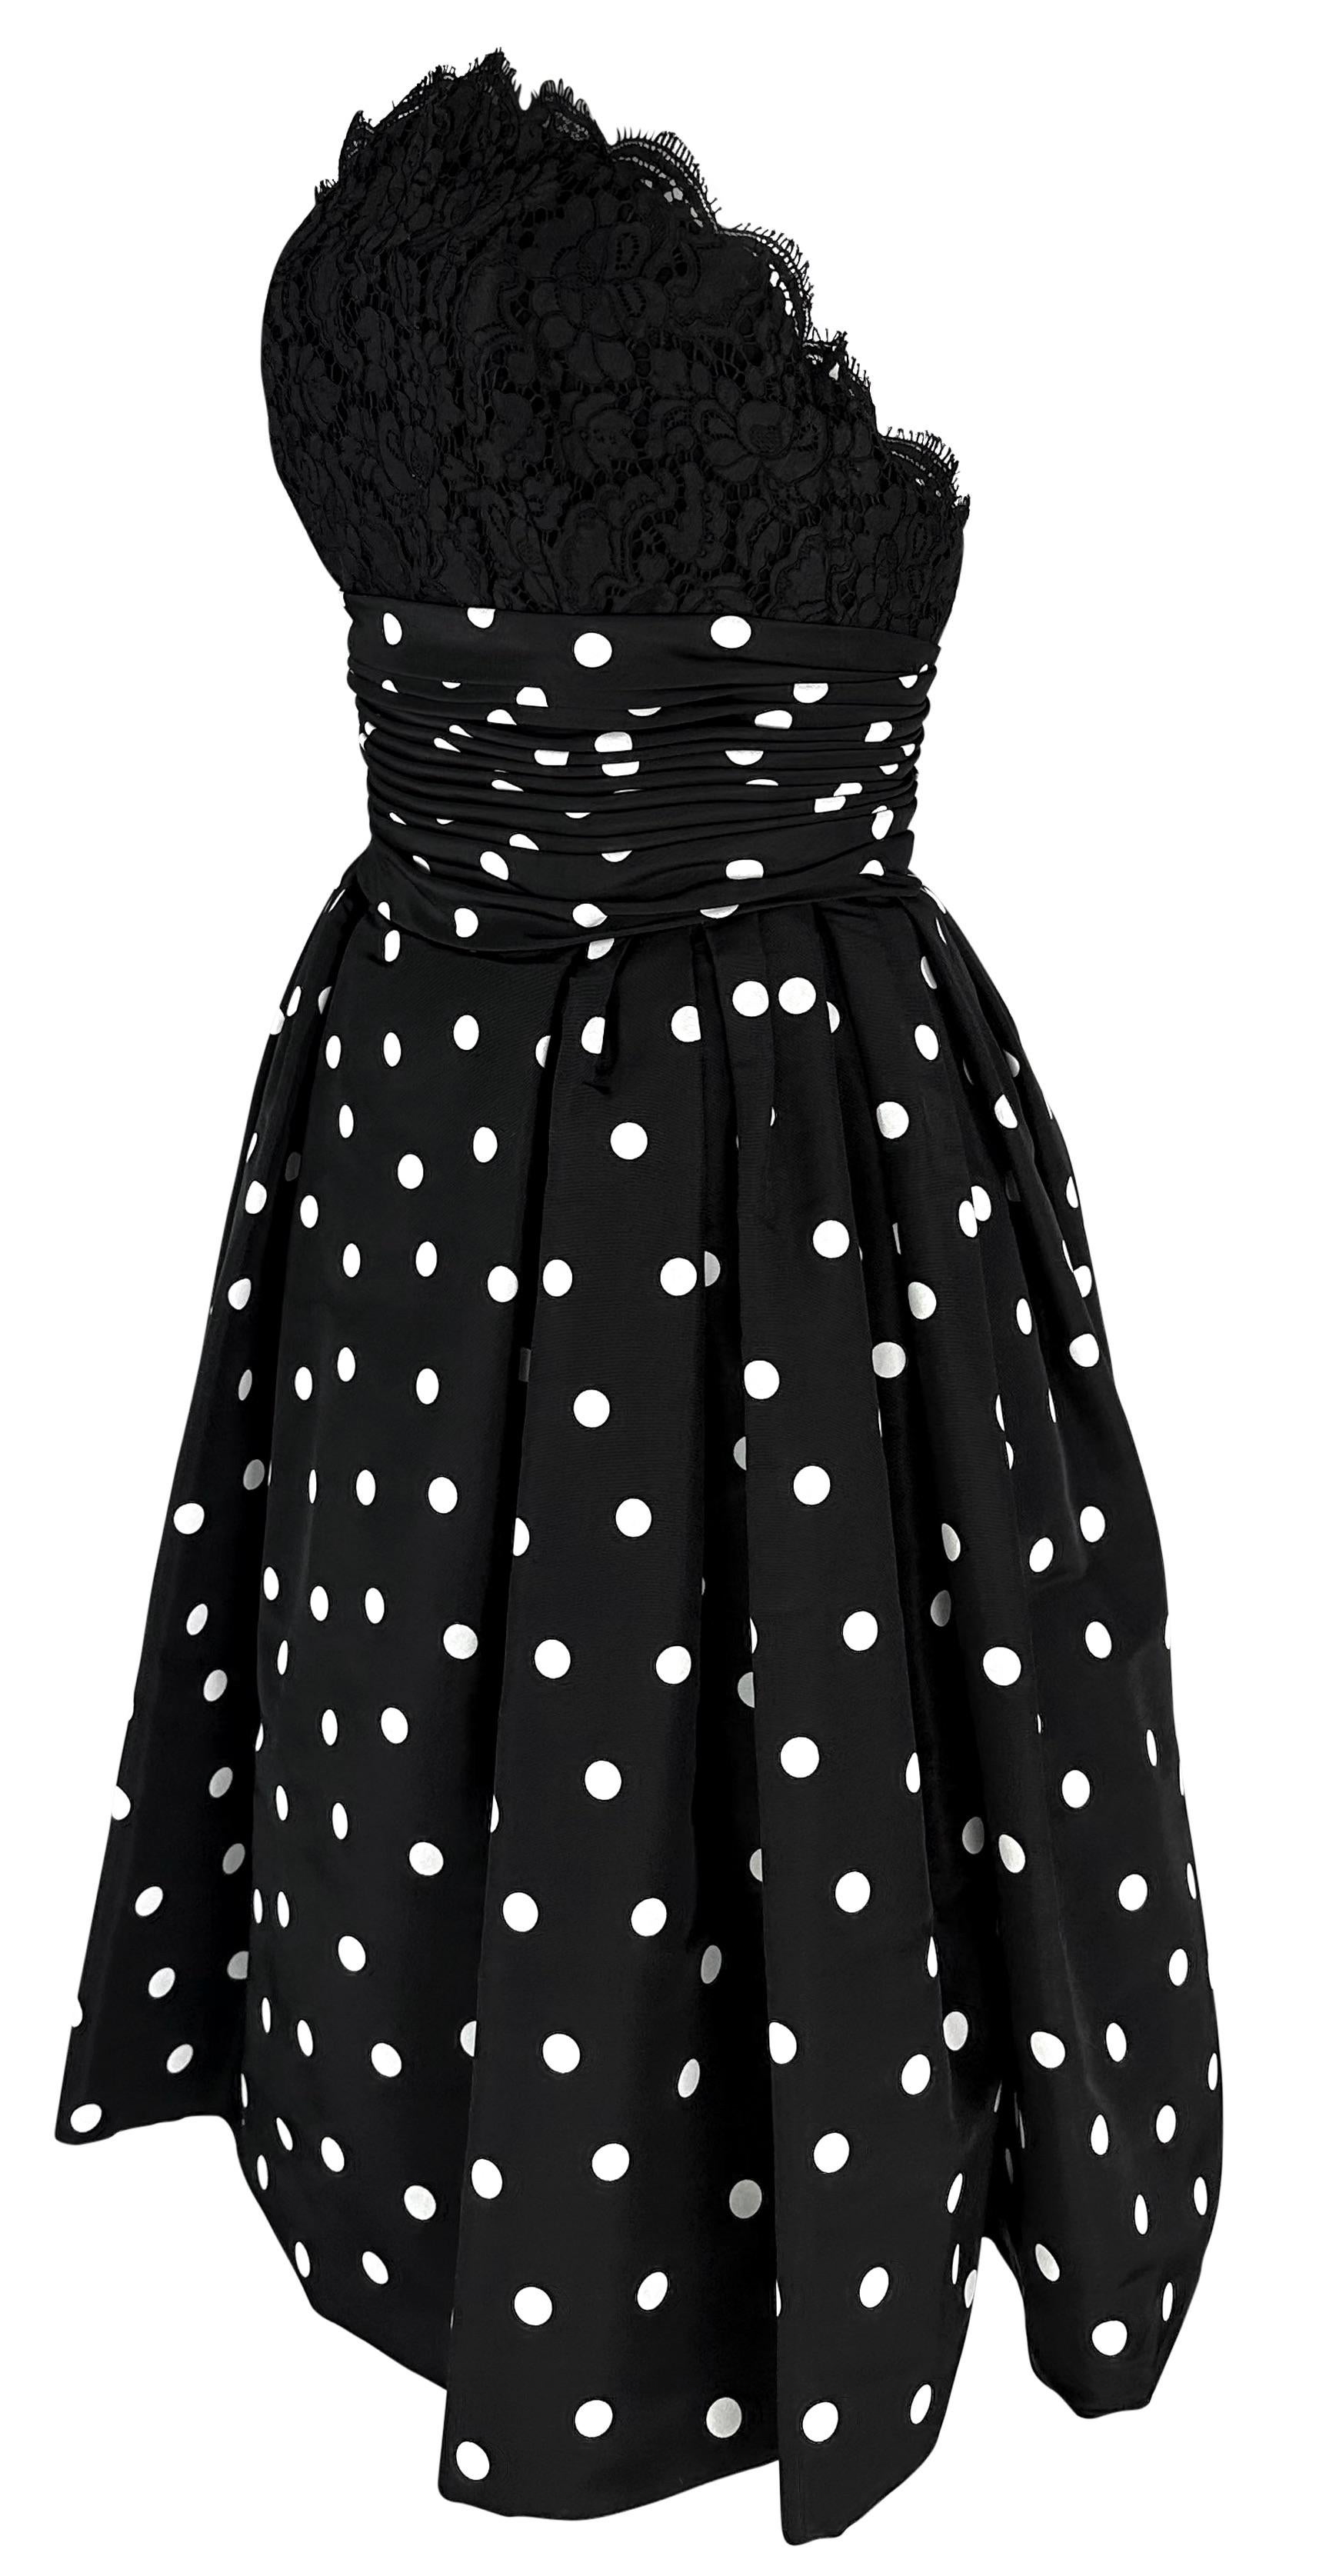  S/S 1988 Chanel by Karl Lagerfeld Runway Polka Dot Lace Strapless Flare Dress In Excellent Condition For Sale In West Hollywood, CA